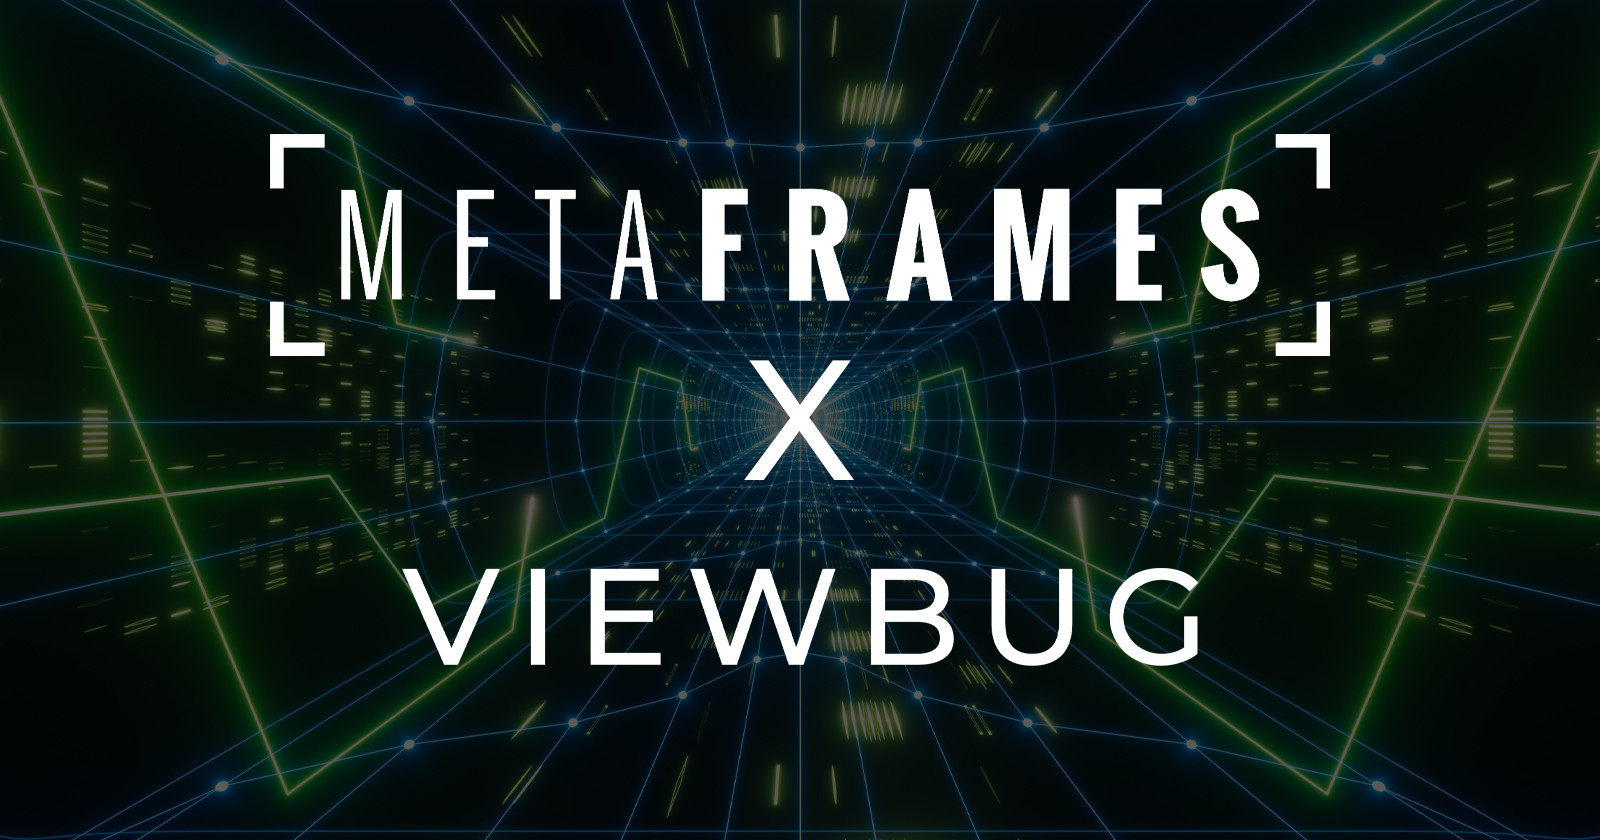 Viewbug Partners with MetaFrames to Enable NFT Minting and Licensing